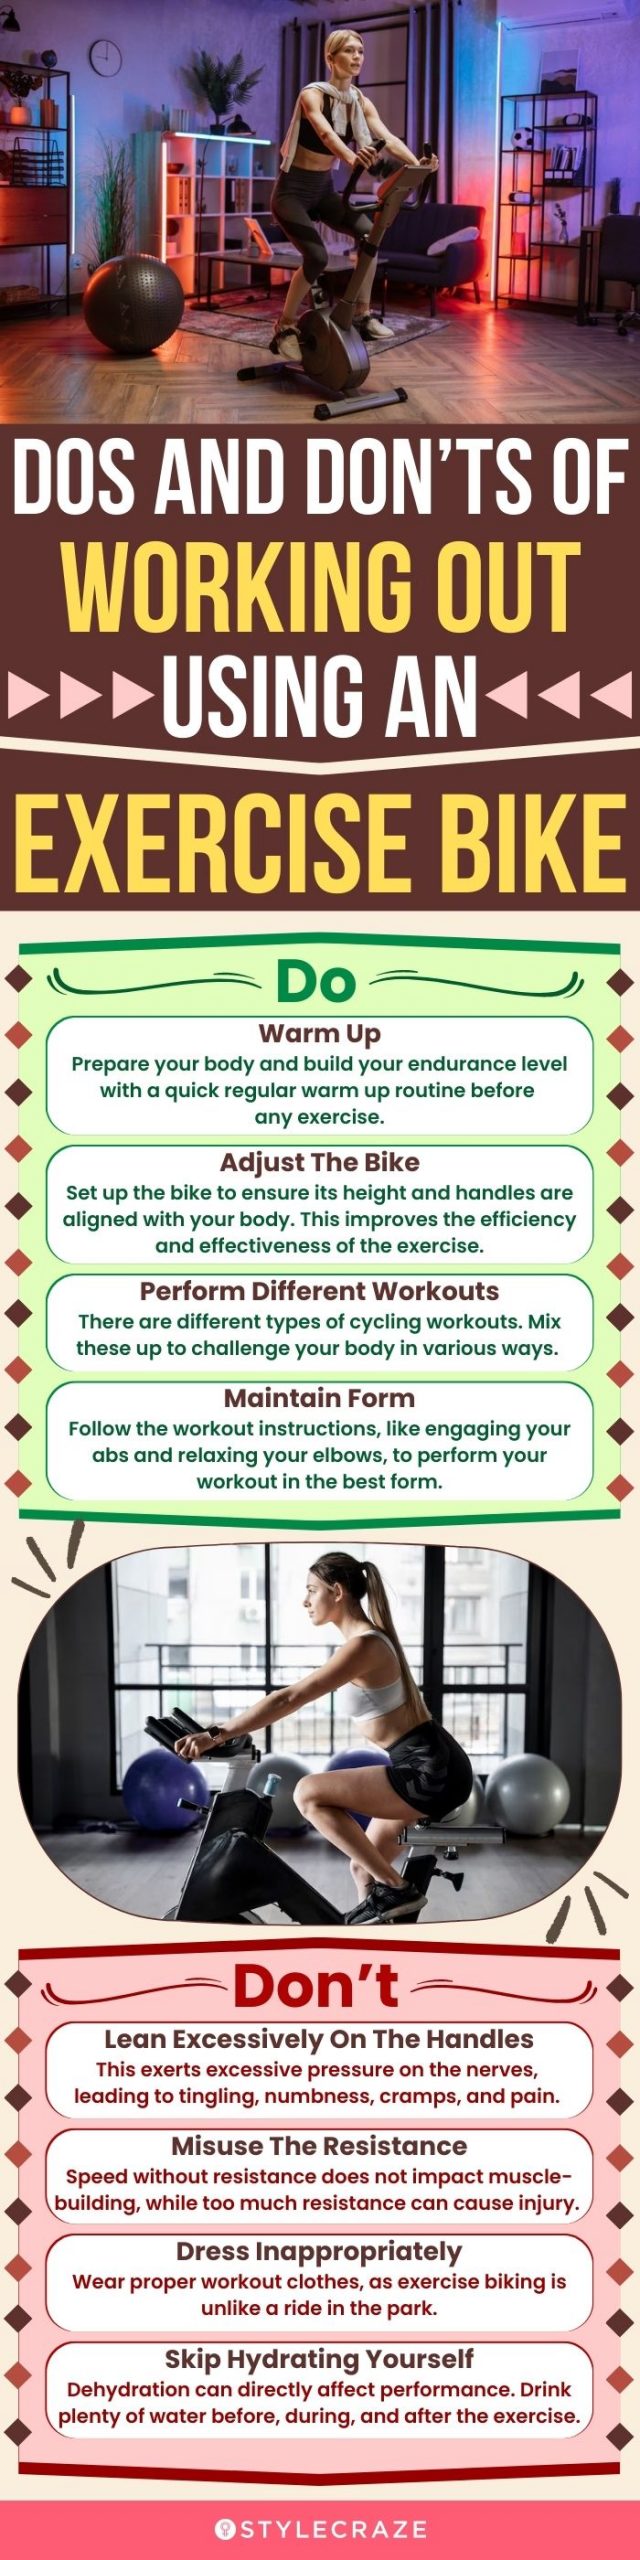 Dos And Donts Of Working Out Using An Exercise Bike(infographic)